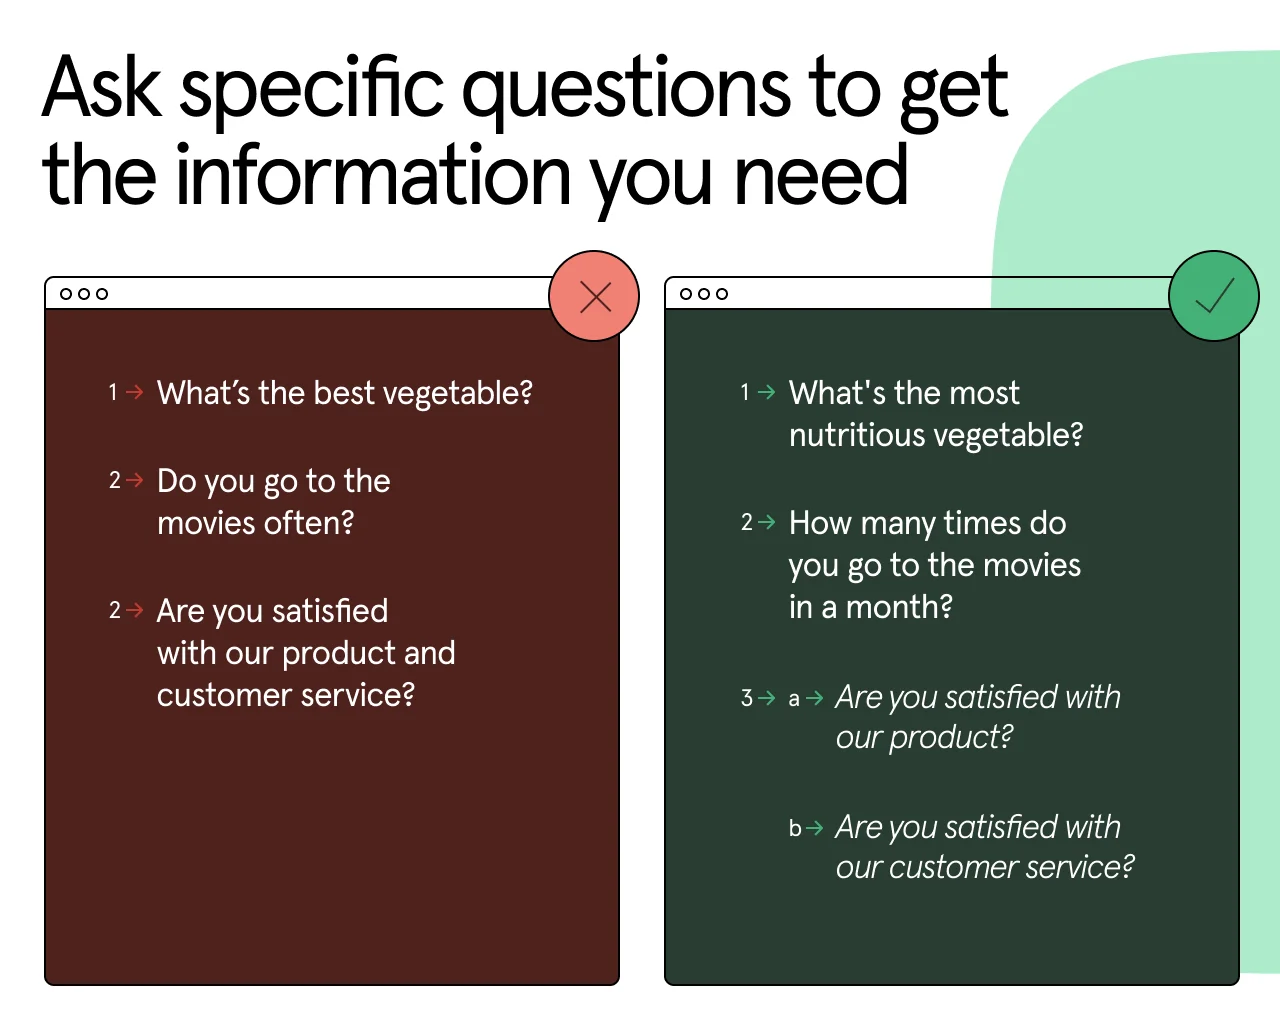 Ask specific questions. For example, "What's the best vegetable?" should be, "What's the most nutritious vegetable?"